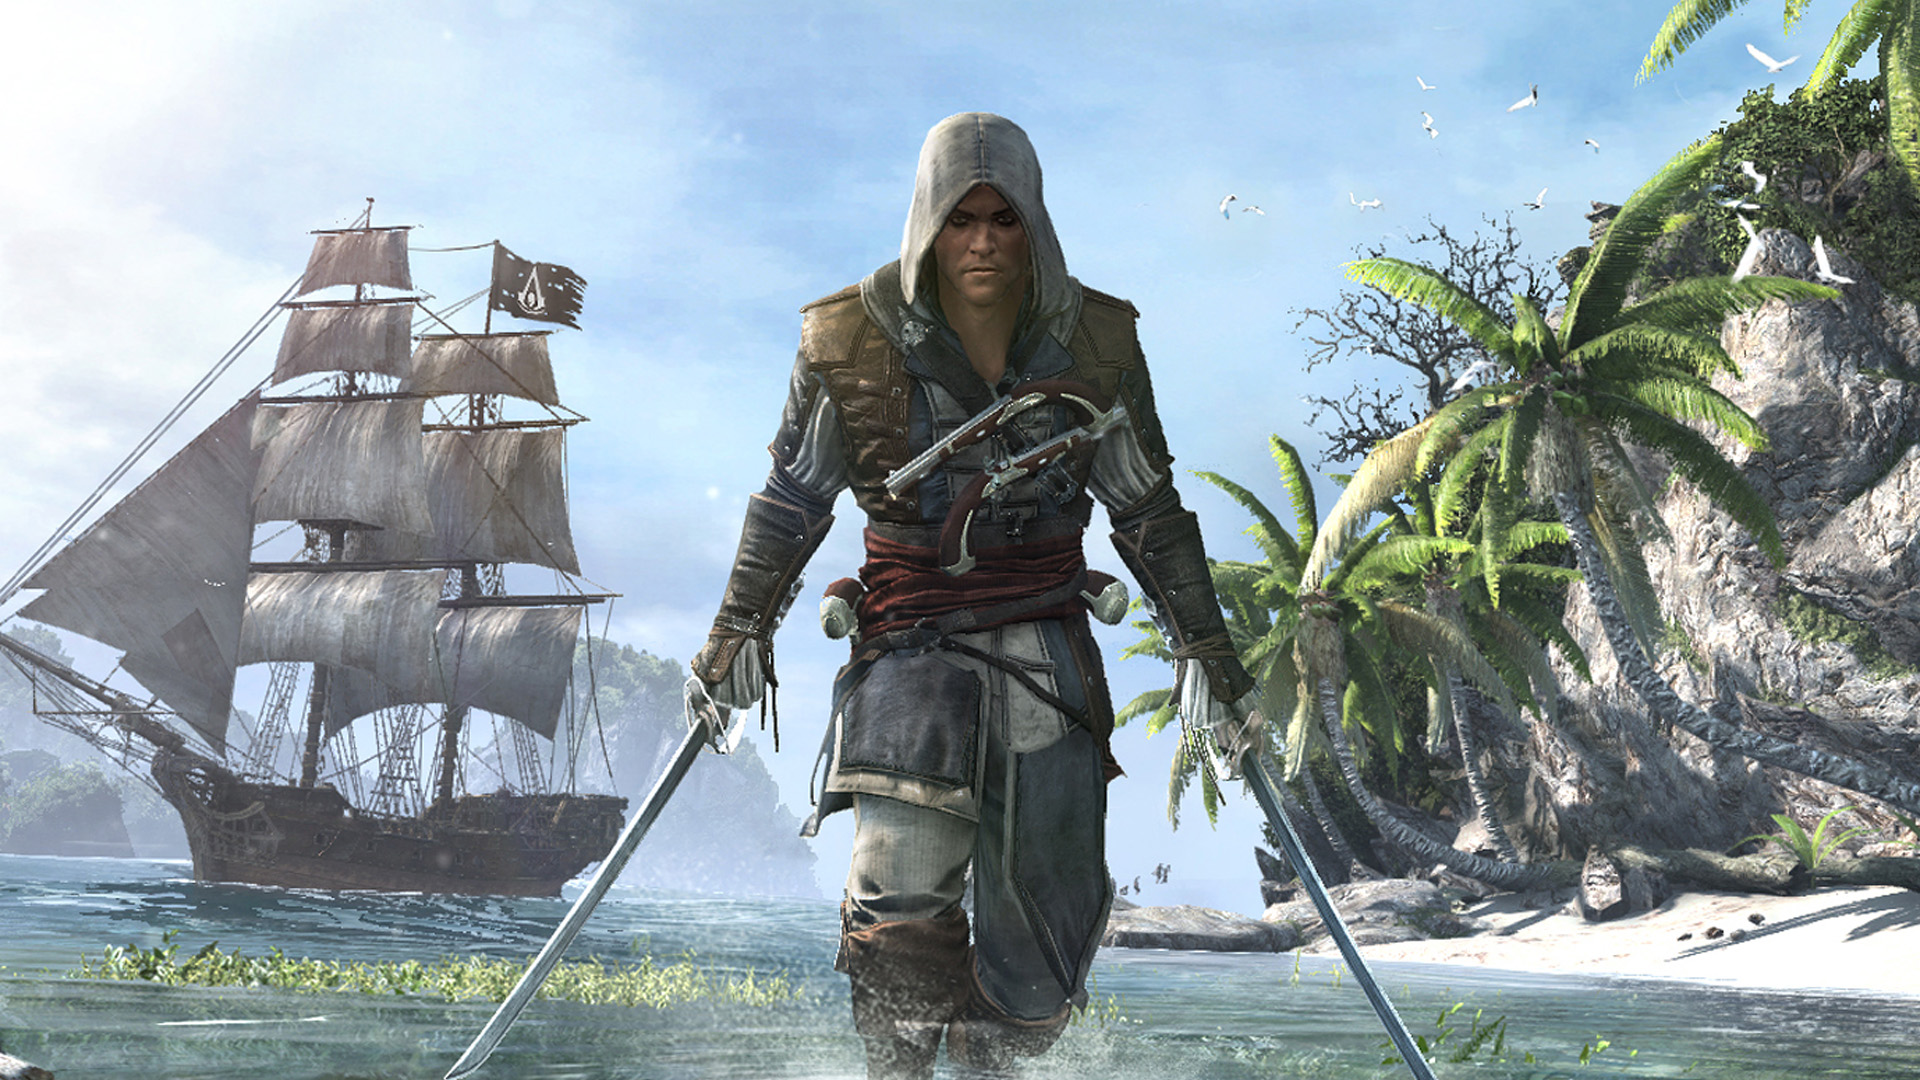 The Assassin's Creed remake we all want may already be in development